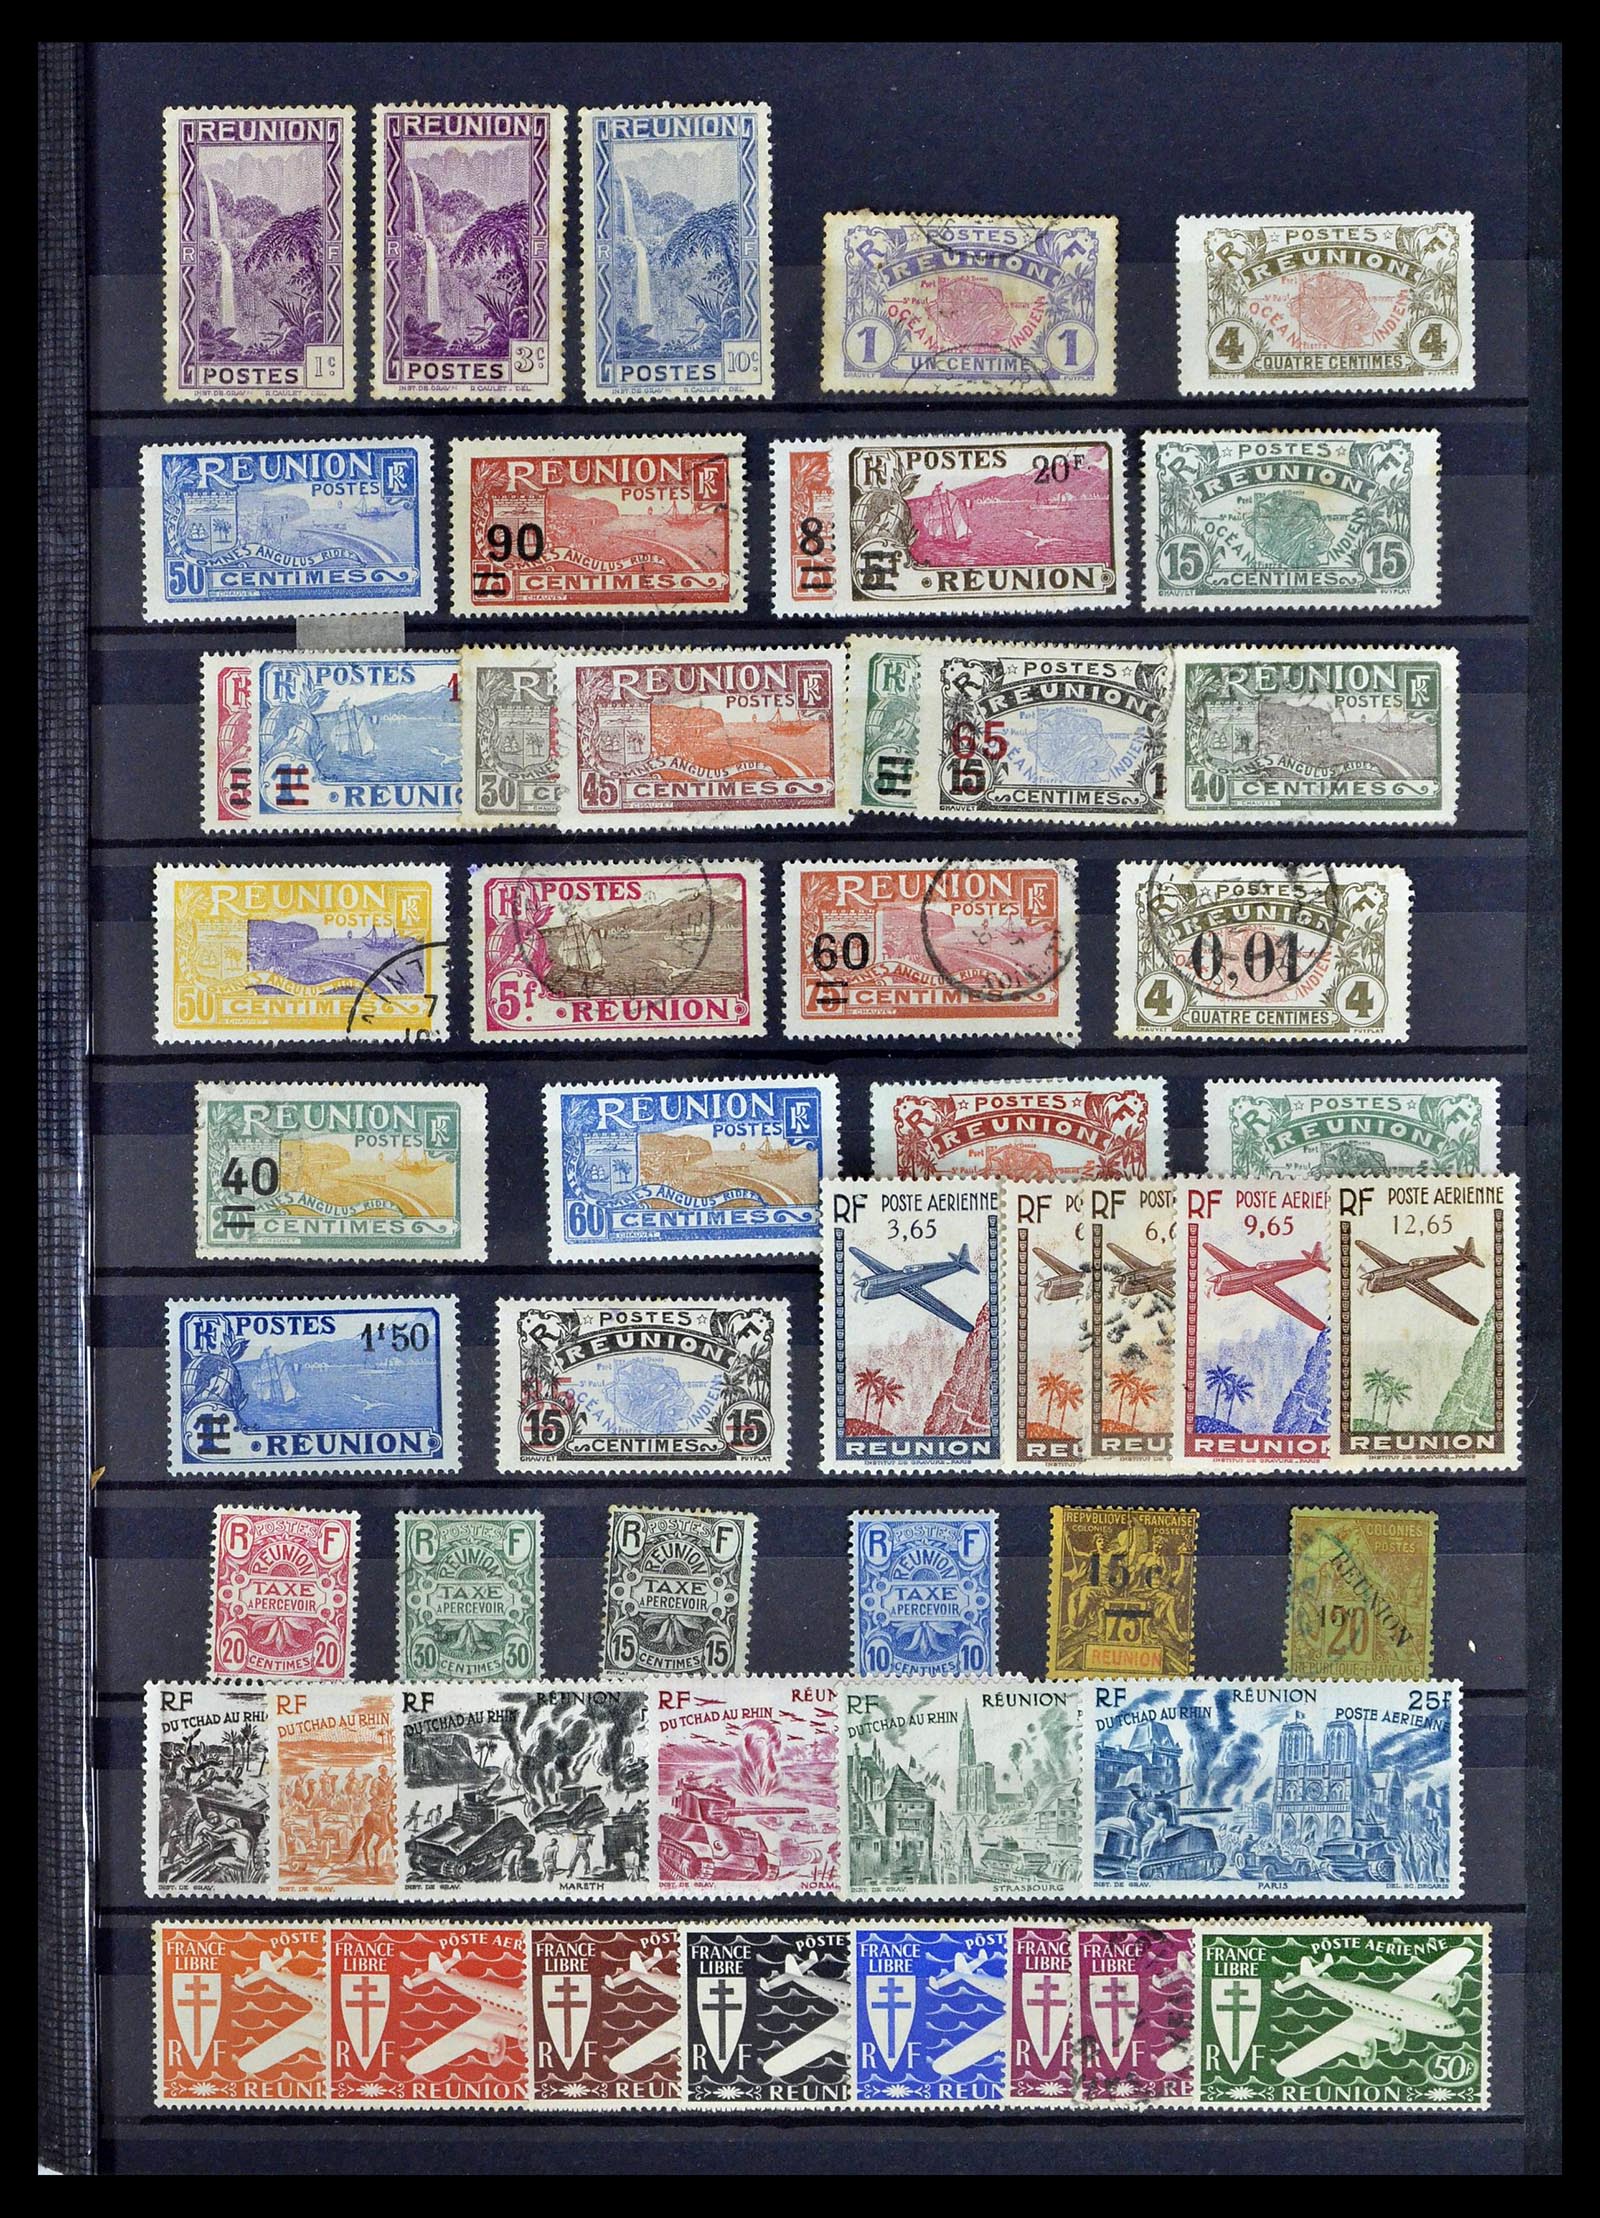 39097 0007 - Stamp collection 39097 French colonies 1880-2000.